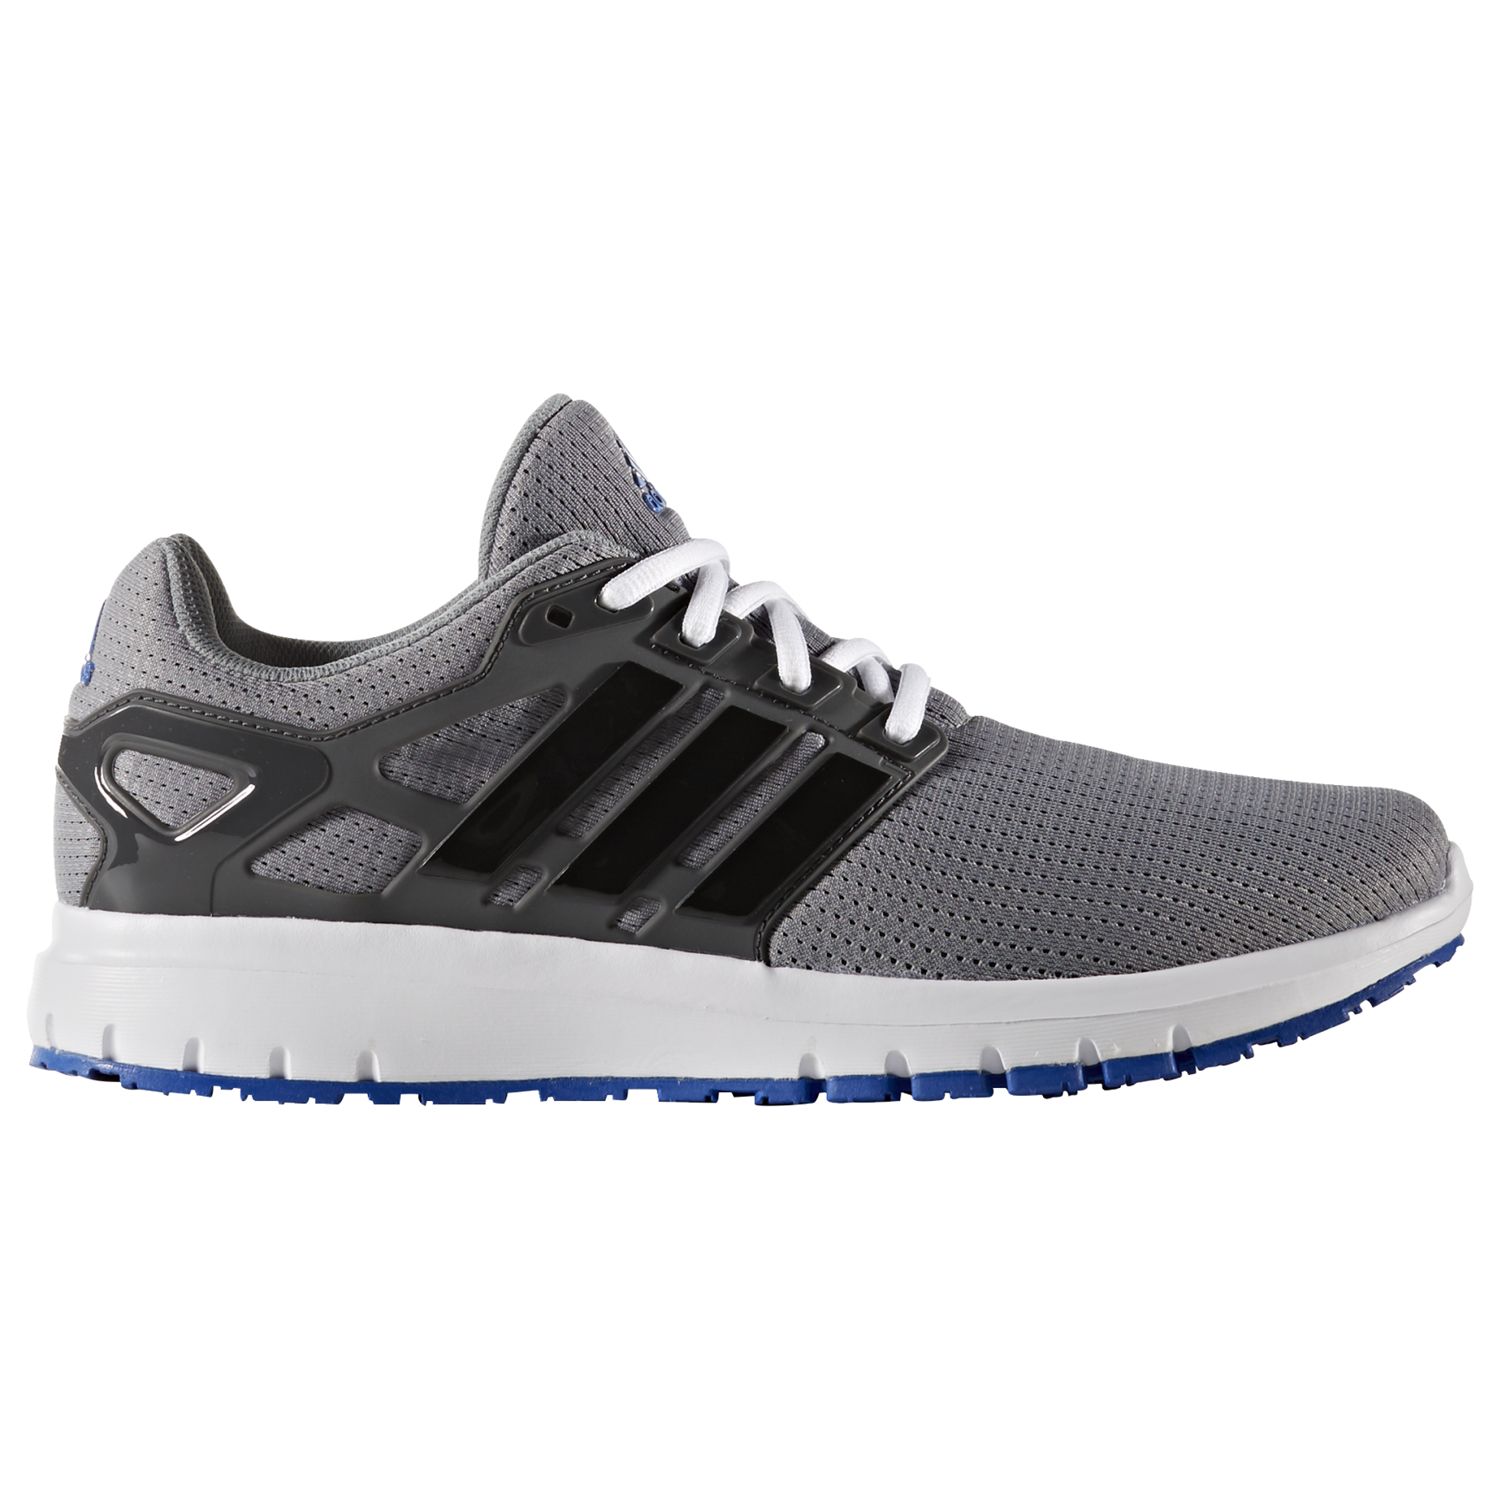 adidas energy cloud mens trainers